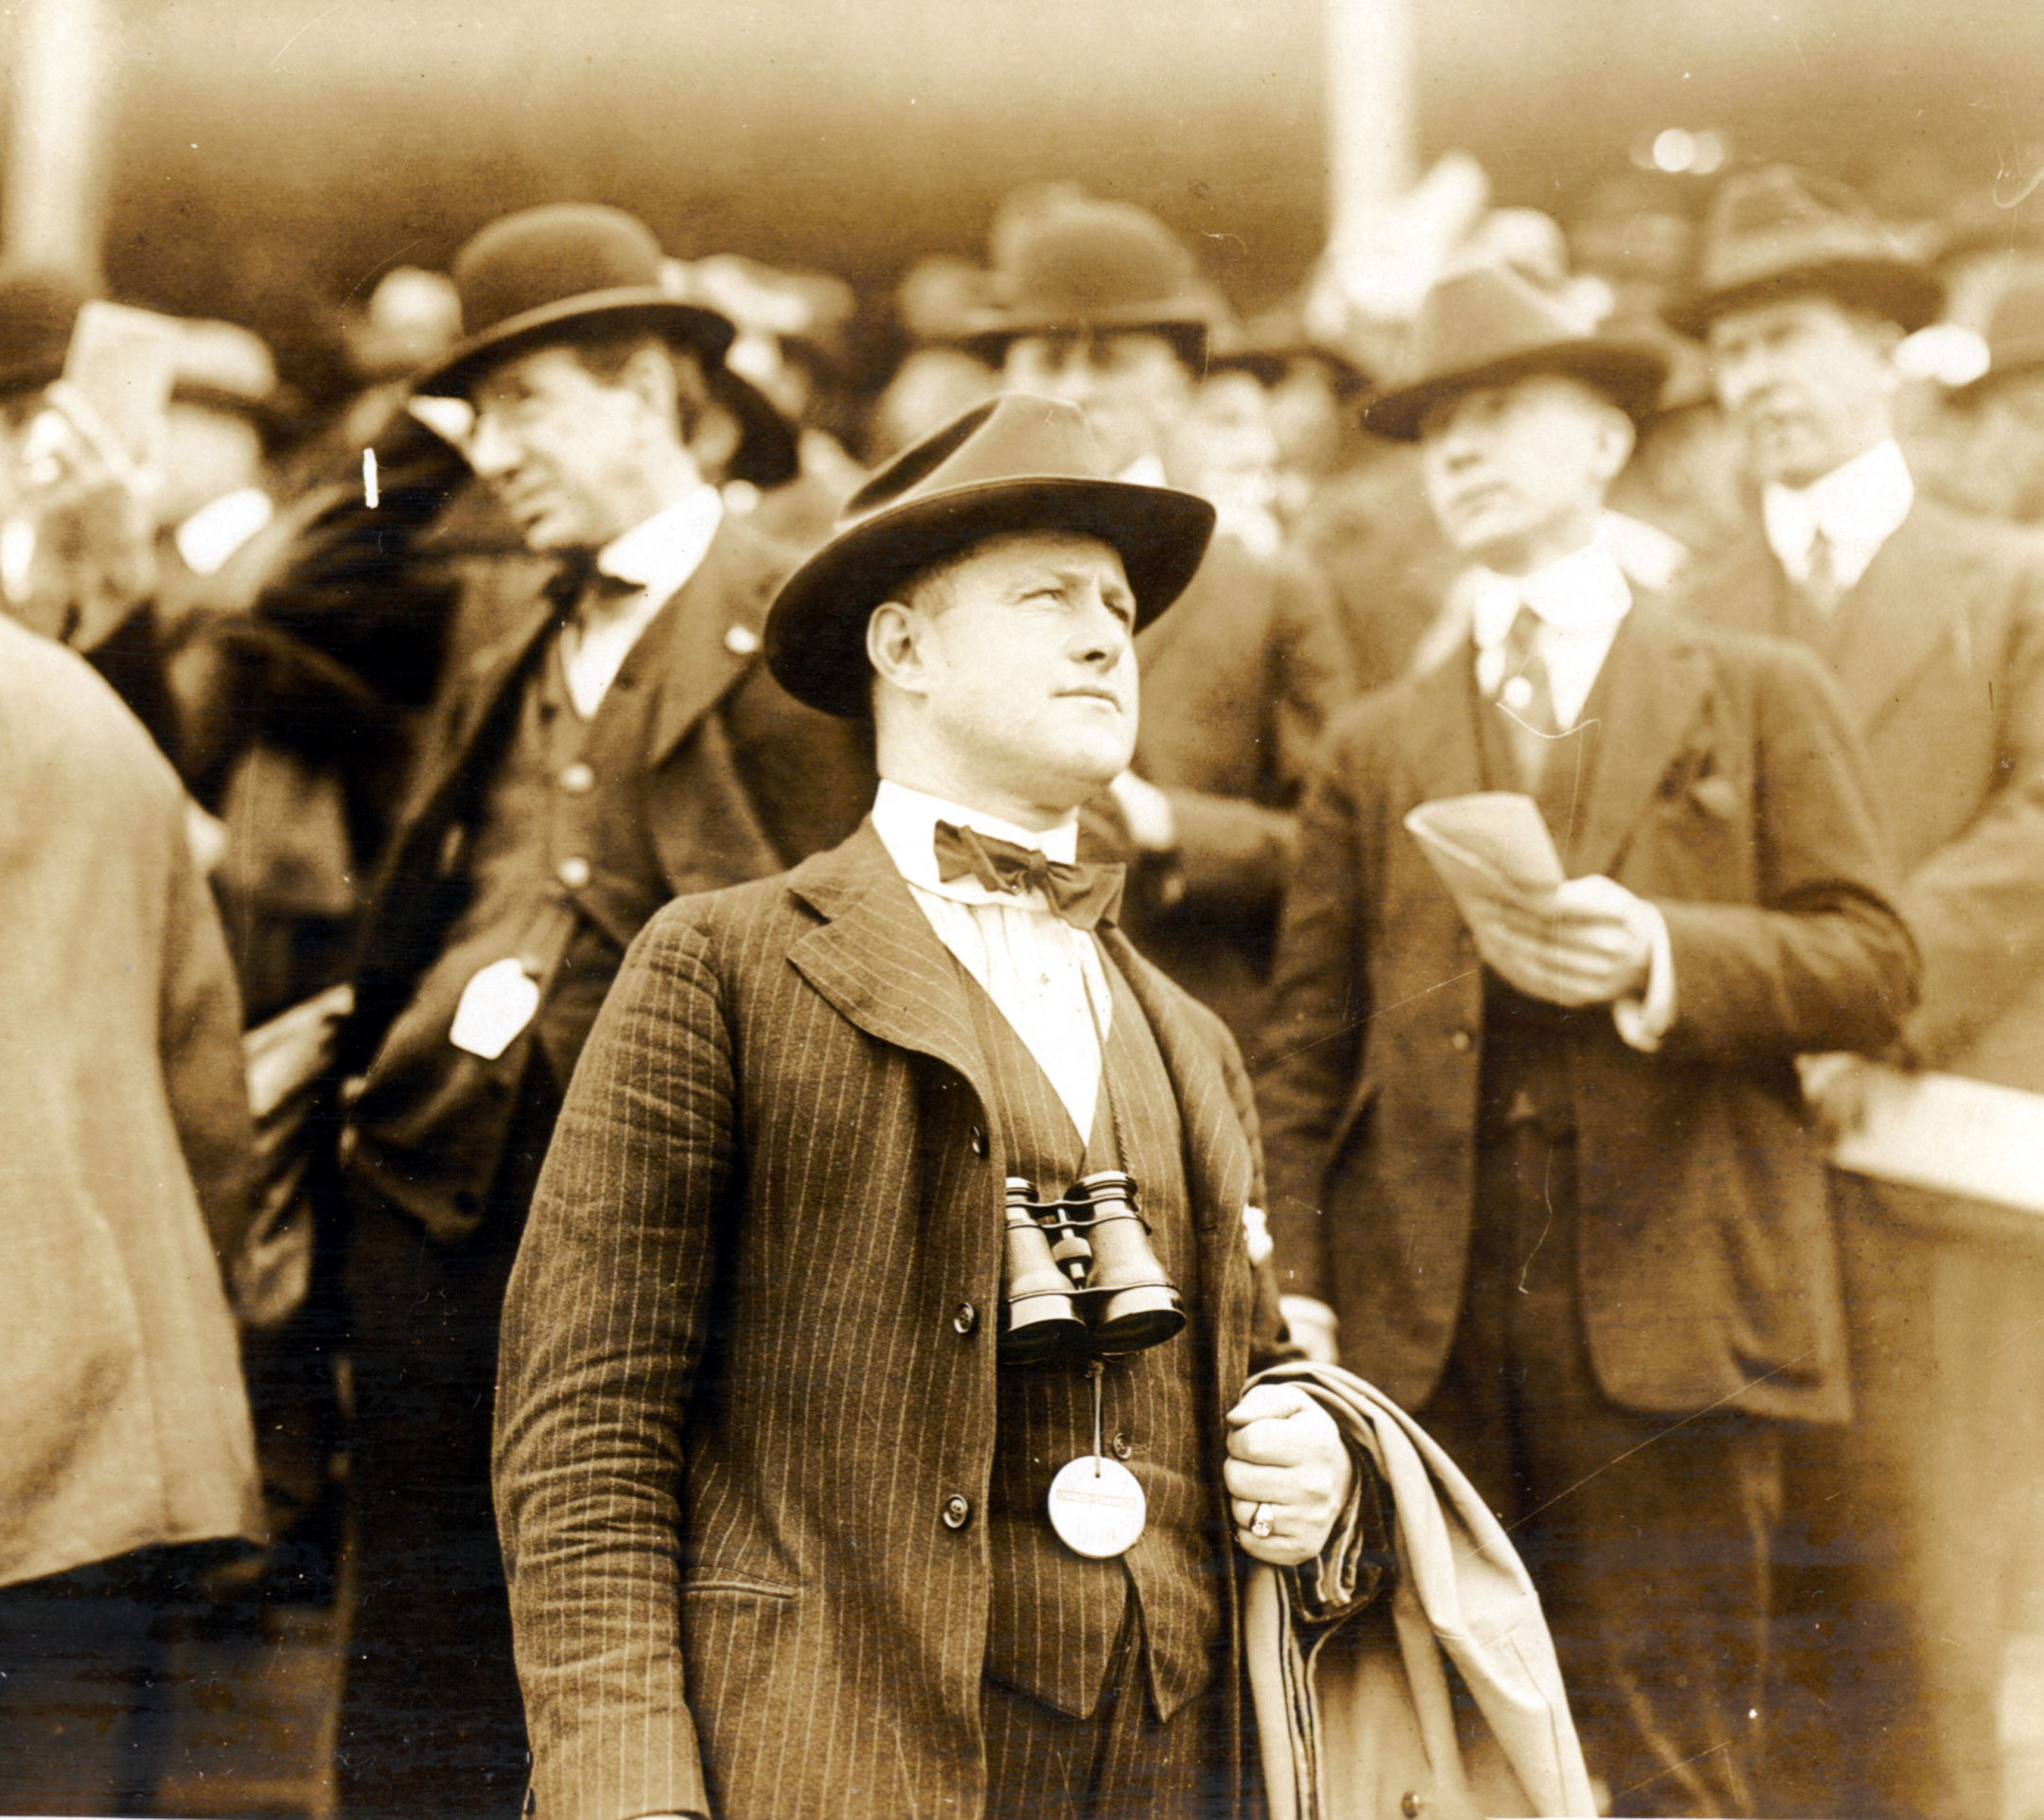 Ben Jones watching a race from the grandstand area of an unidentified track (Museum Collection)